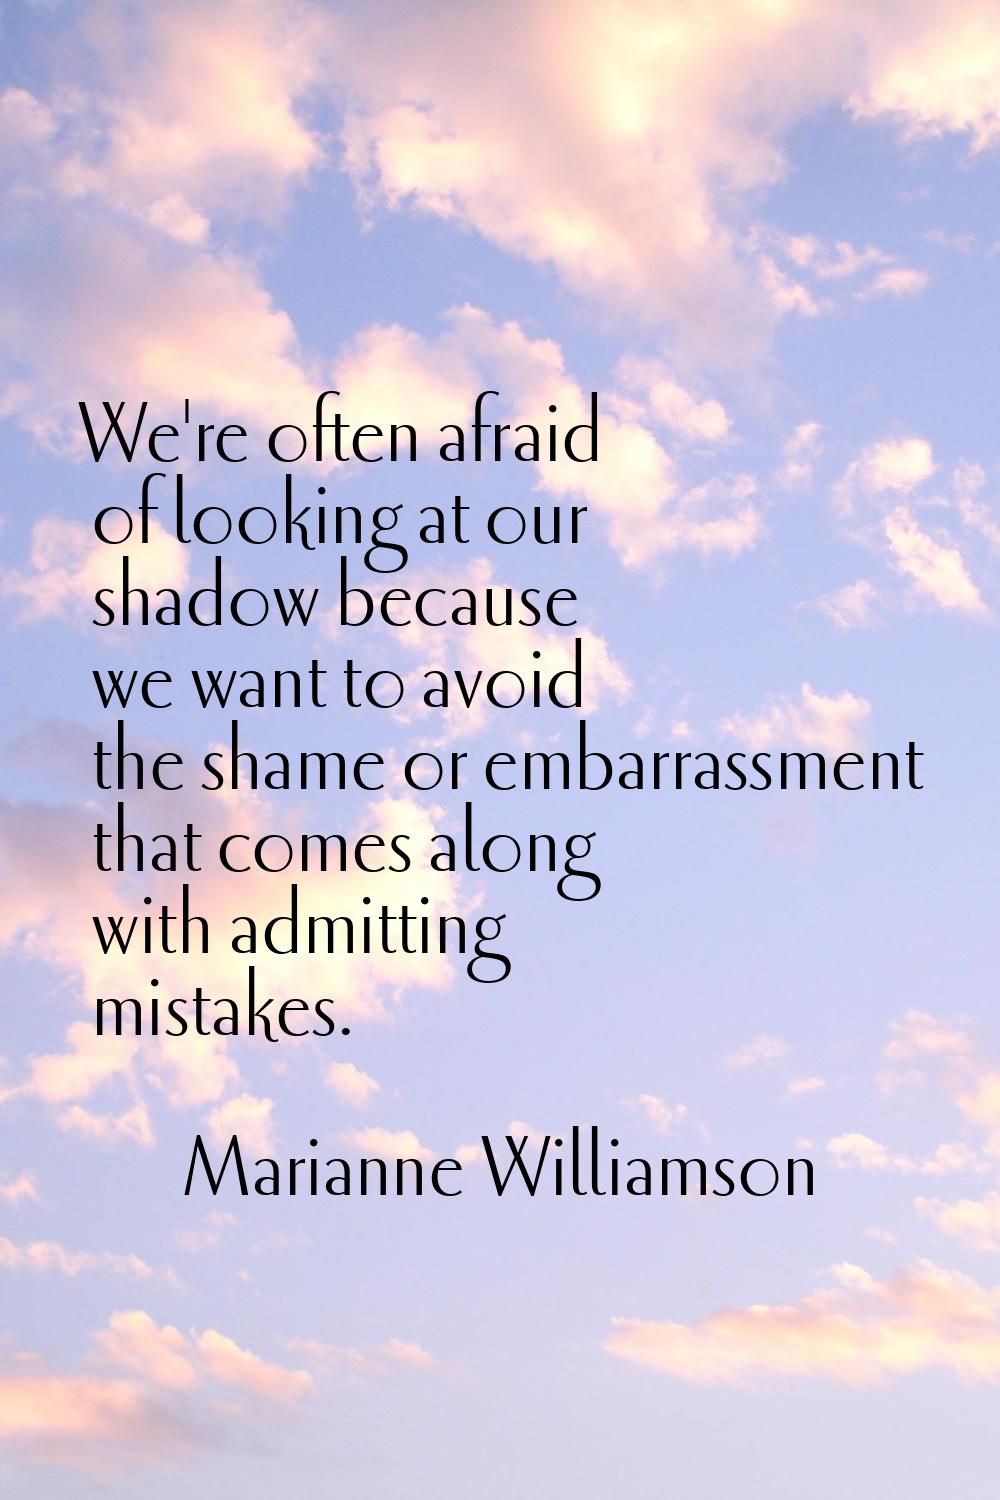 We're often afraid of looking at our shadow because we want to avoid the shame or embarrassment tha